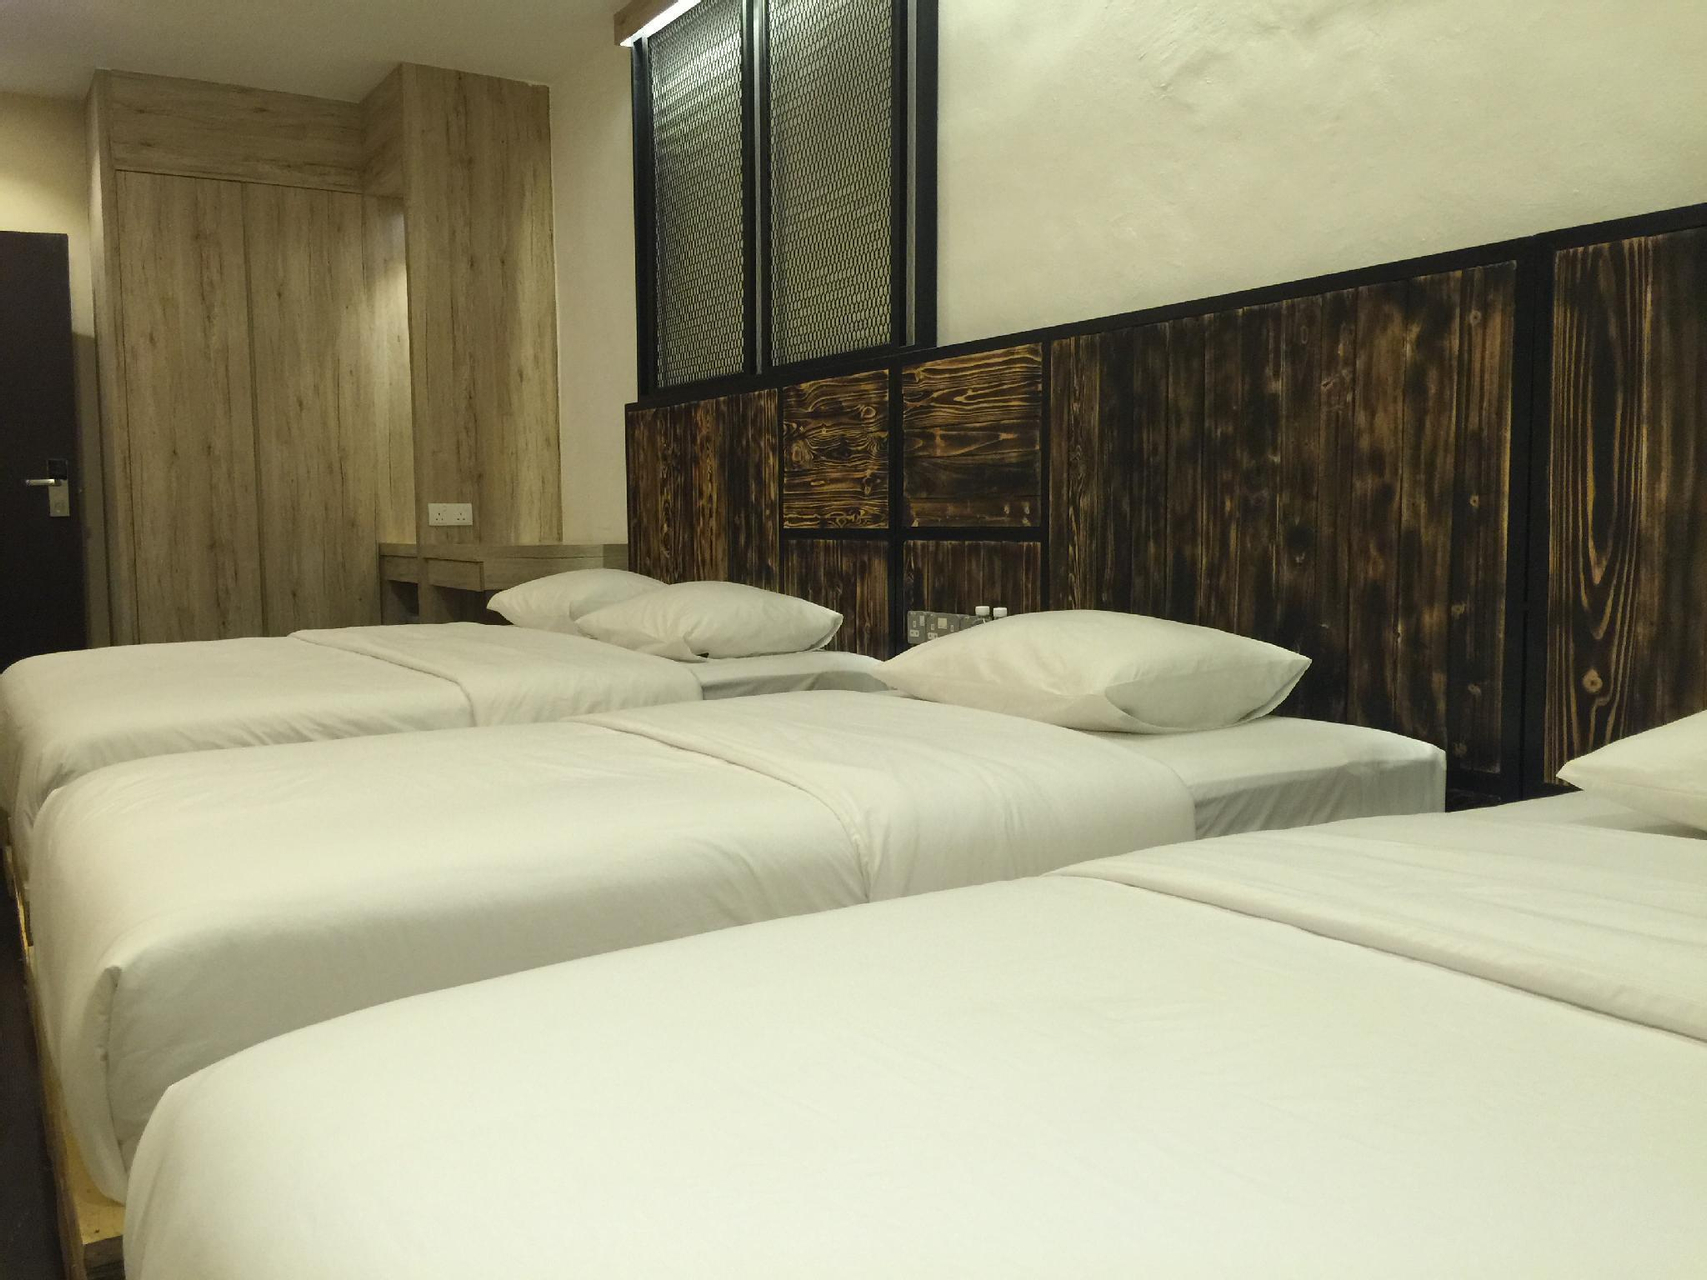 Bedroom 2, The Oikos Hotel, Pontian